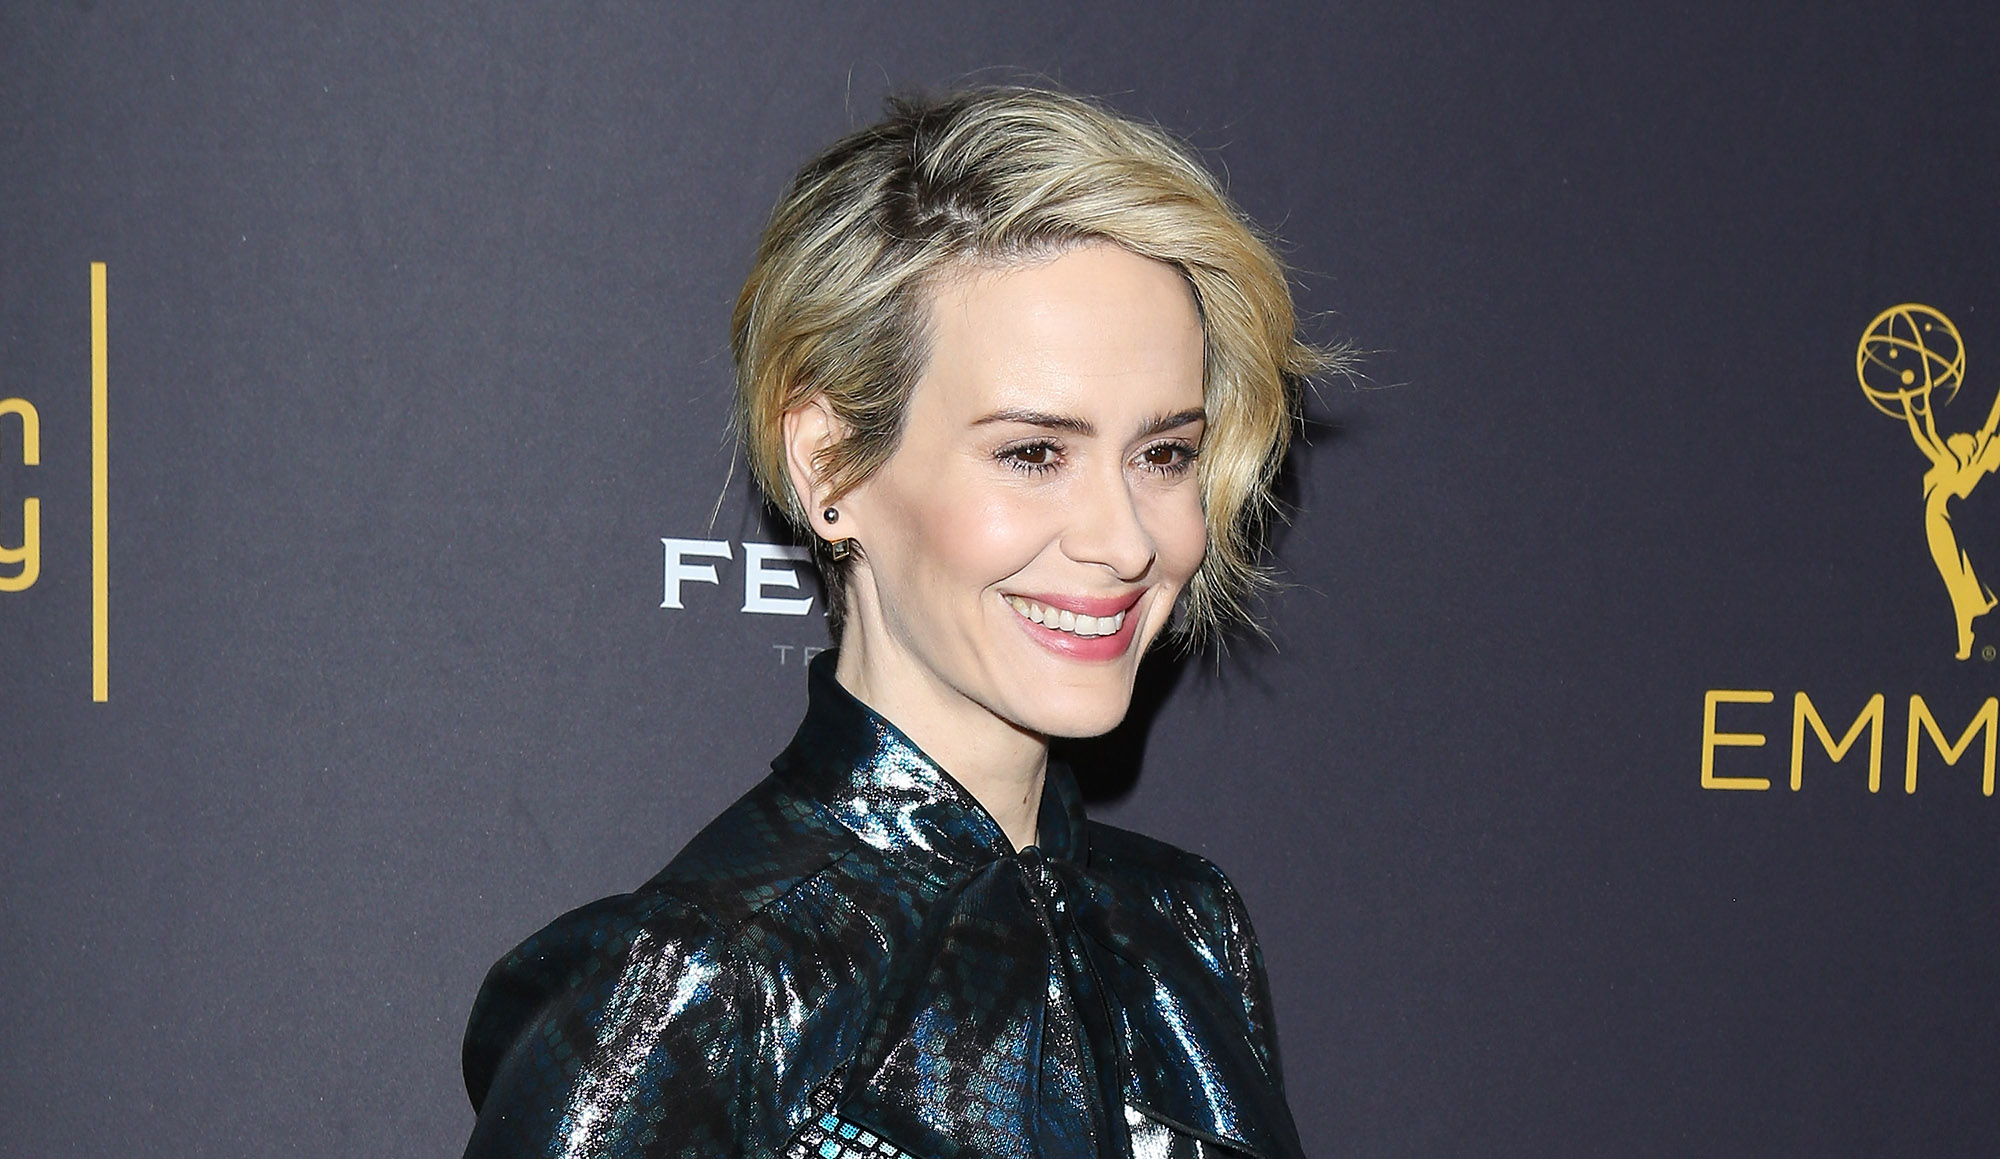 Sarah Paulson attends the Television Academy's Performers Peer Group celebration held at Montage Beverly Hills on August 22, 2016 in Beverly Hills, California.  (Photo by Michael Tran/FilmMagic) (Michael Tran&mdash;FilmMagic)